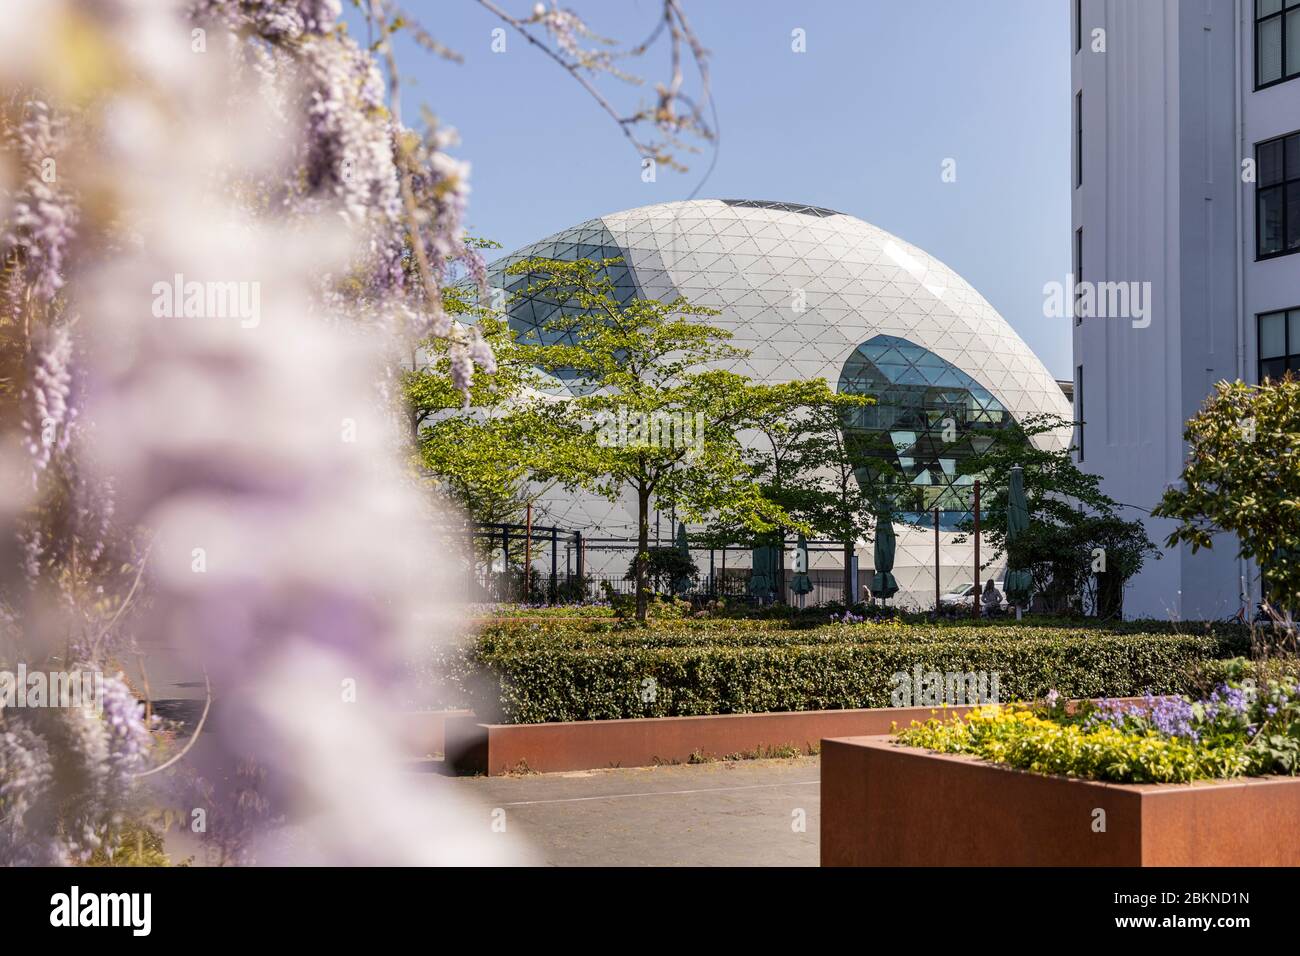 Eindhoven, The Netherlands, April 21st 2020. Exterior facade of the famous’ Blob’ building designed by Massimiliano Fuksas surrounded by a greenery an Stock Photo